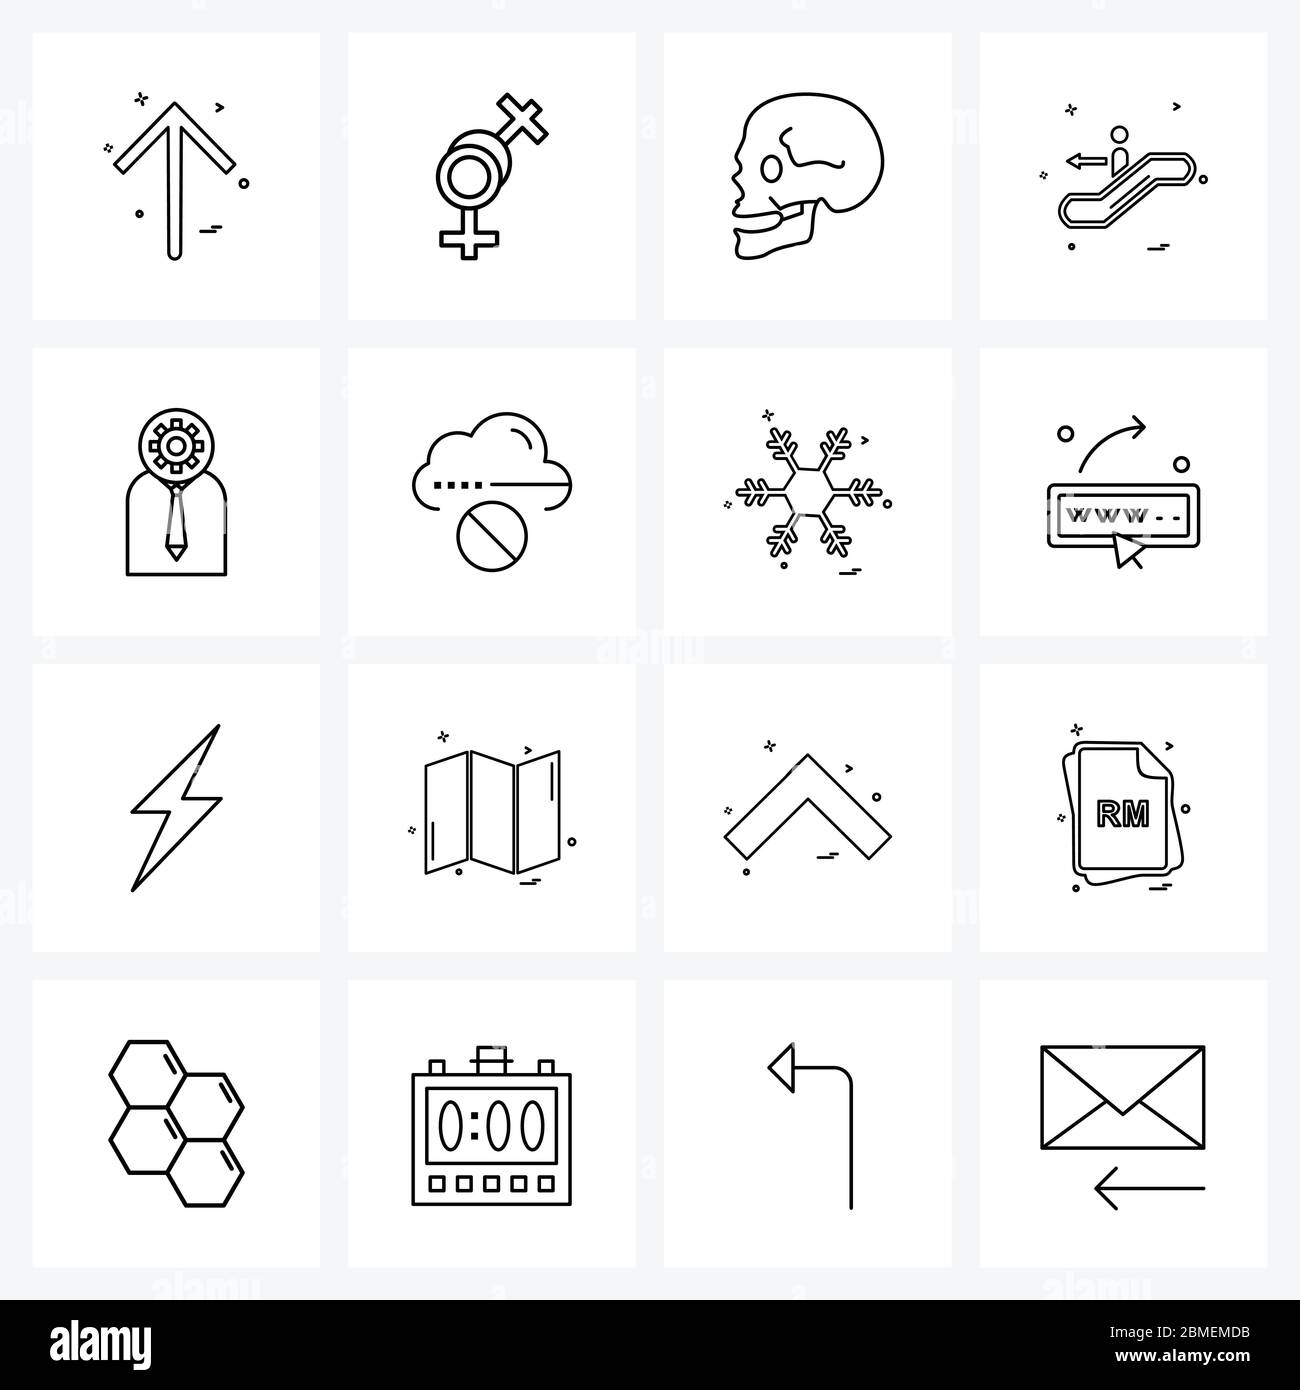 Isolated Symbols Set of 16 Simple Line Icons of user, stairs, hospital ...